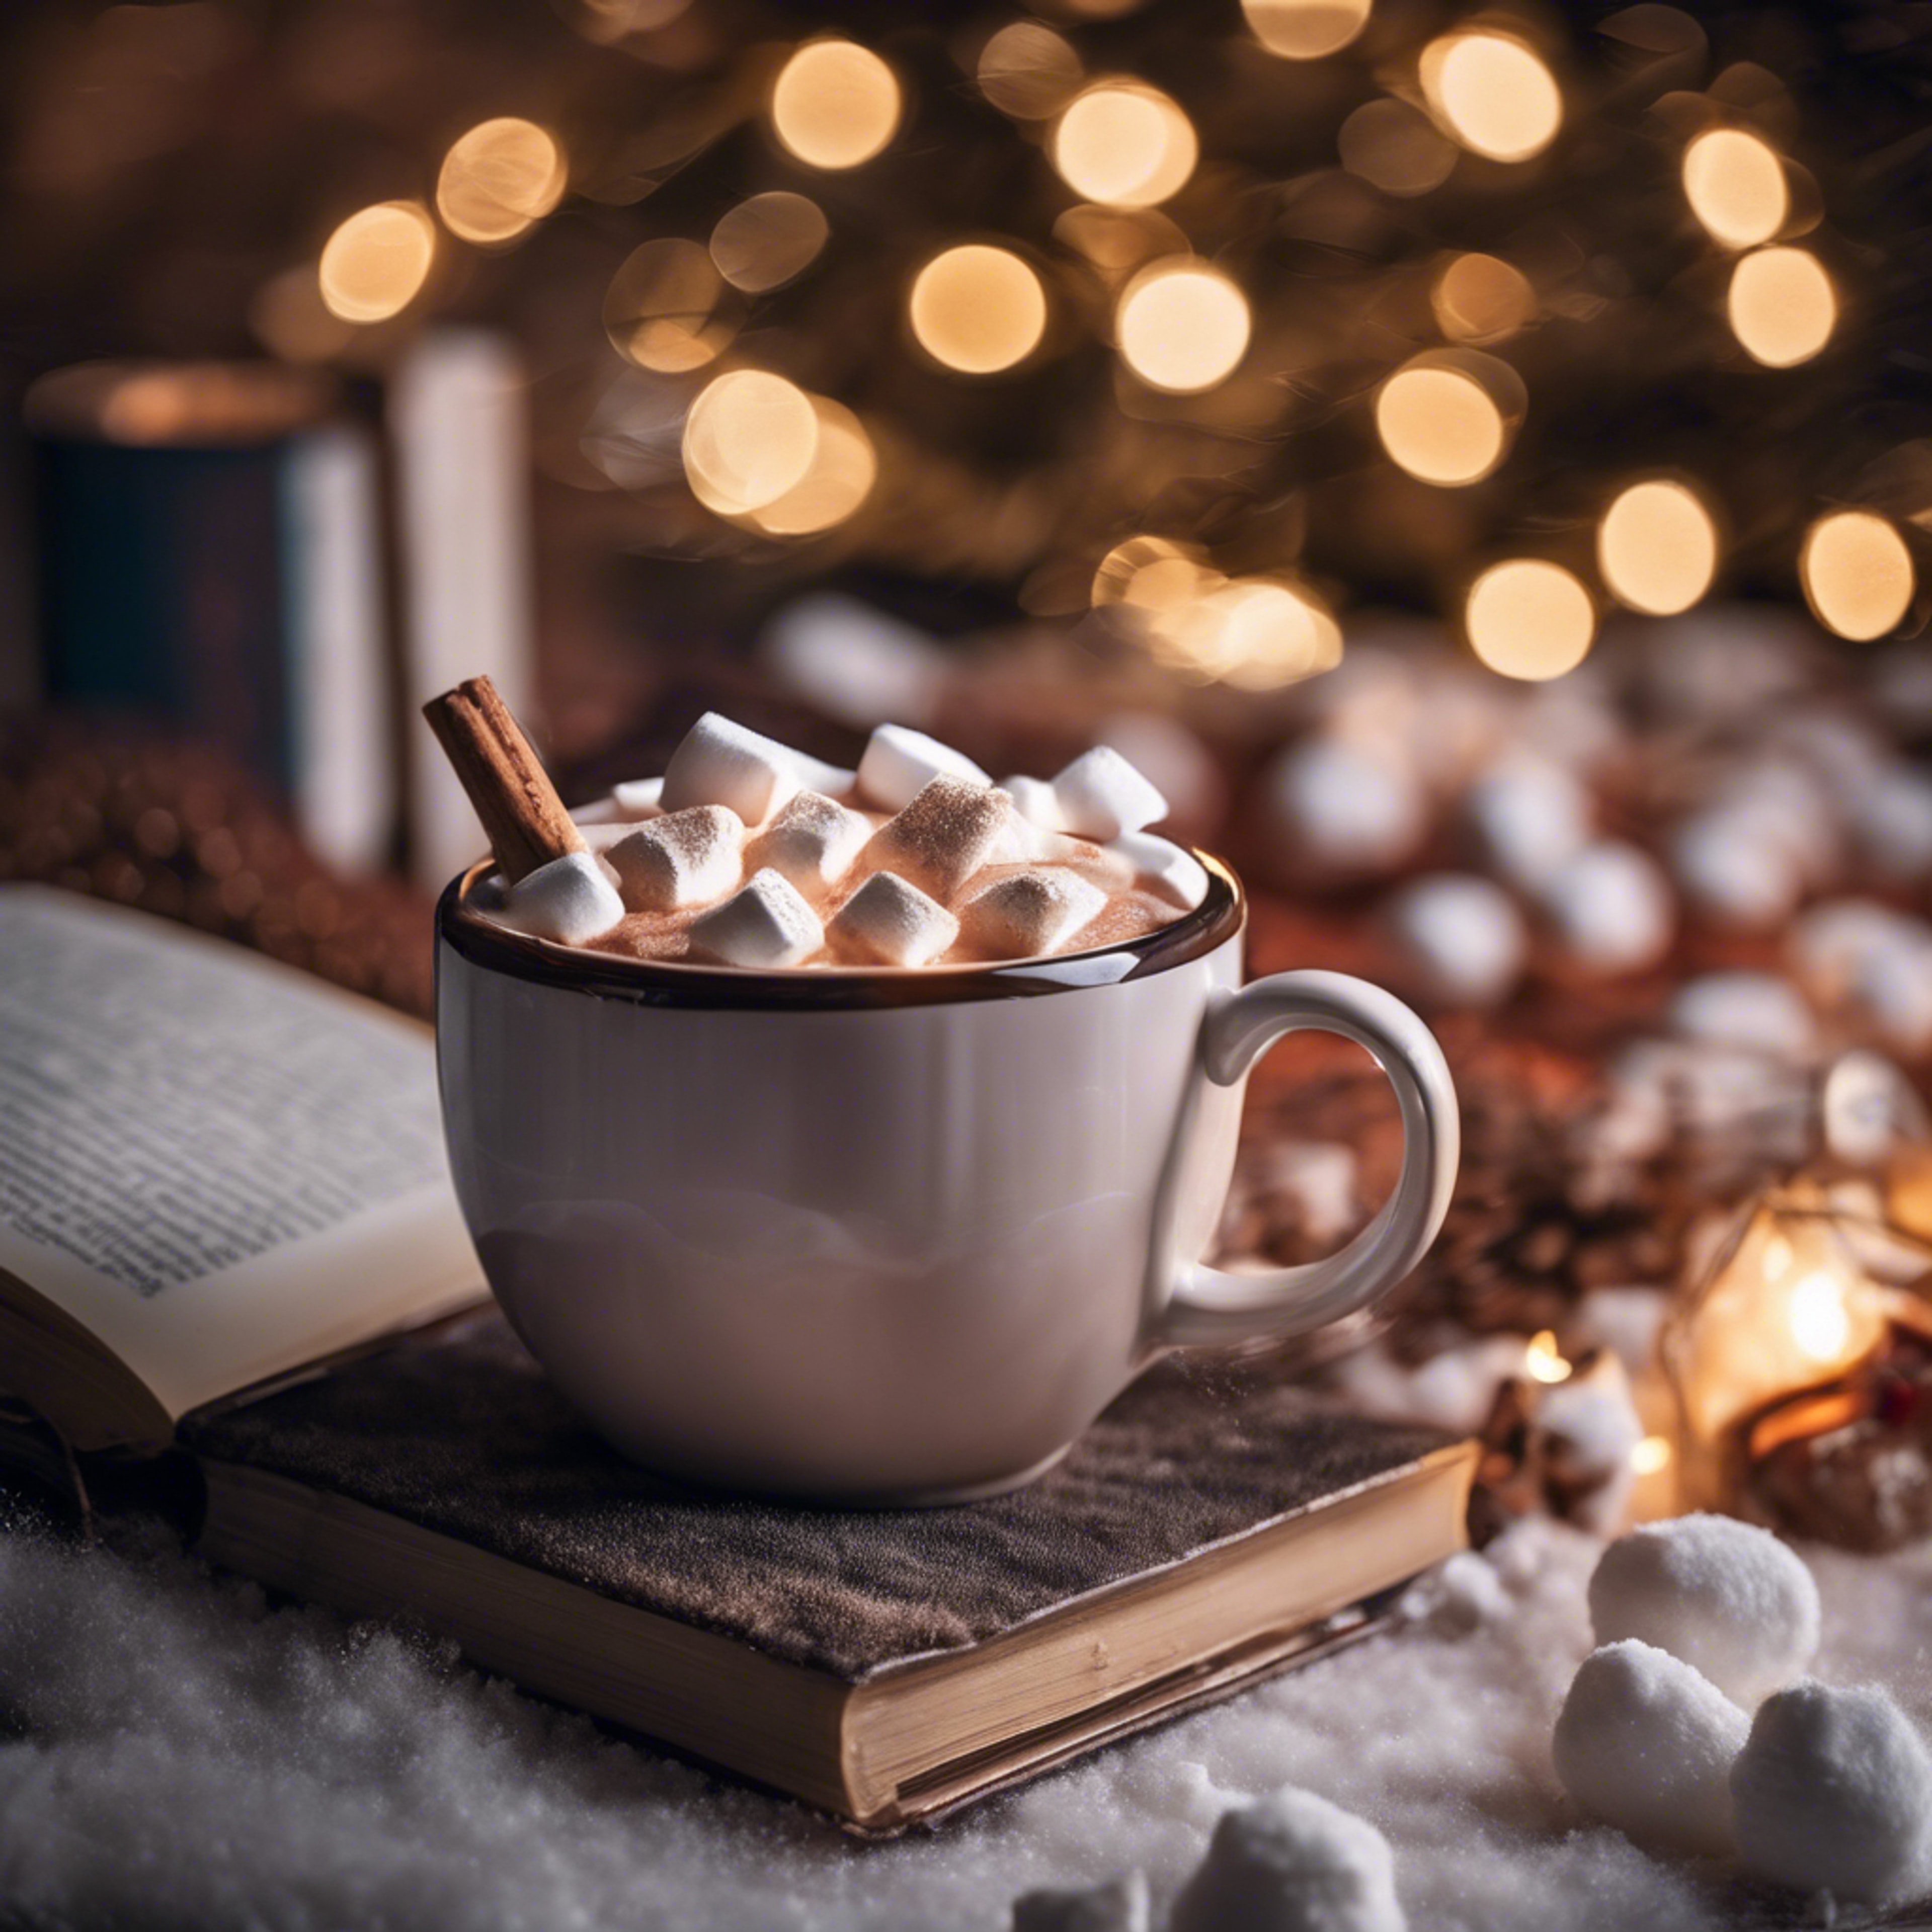 A steaming mug of hot cocoa topped with marshmallows, paired with a good book on a winter night. Behang[bb1918feb58c4b029e23]